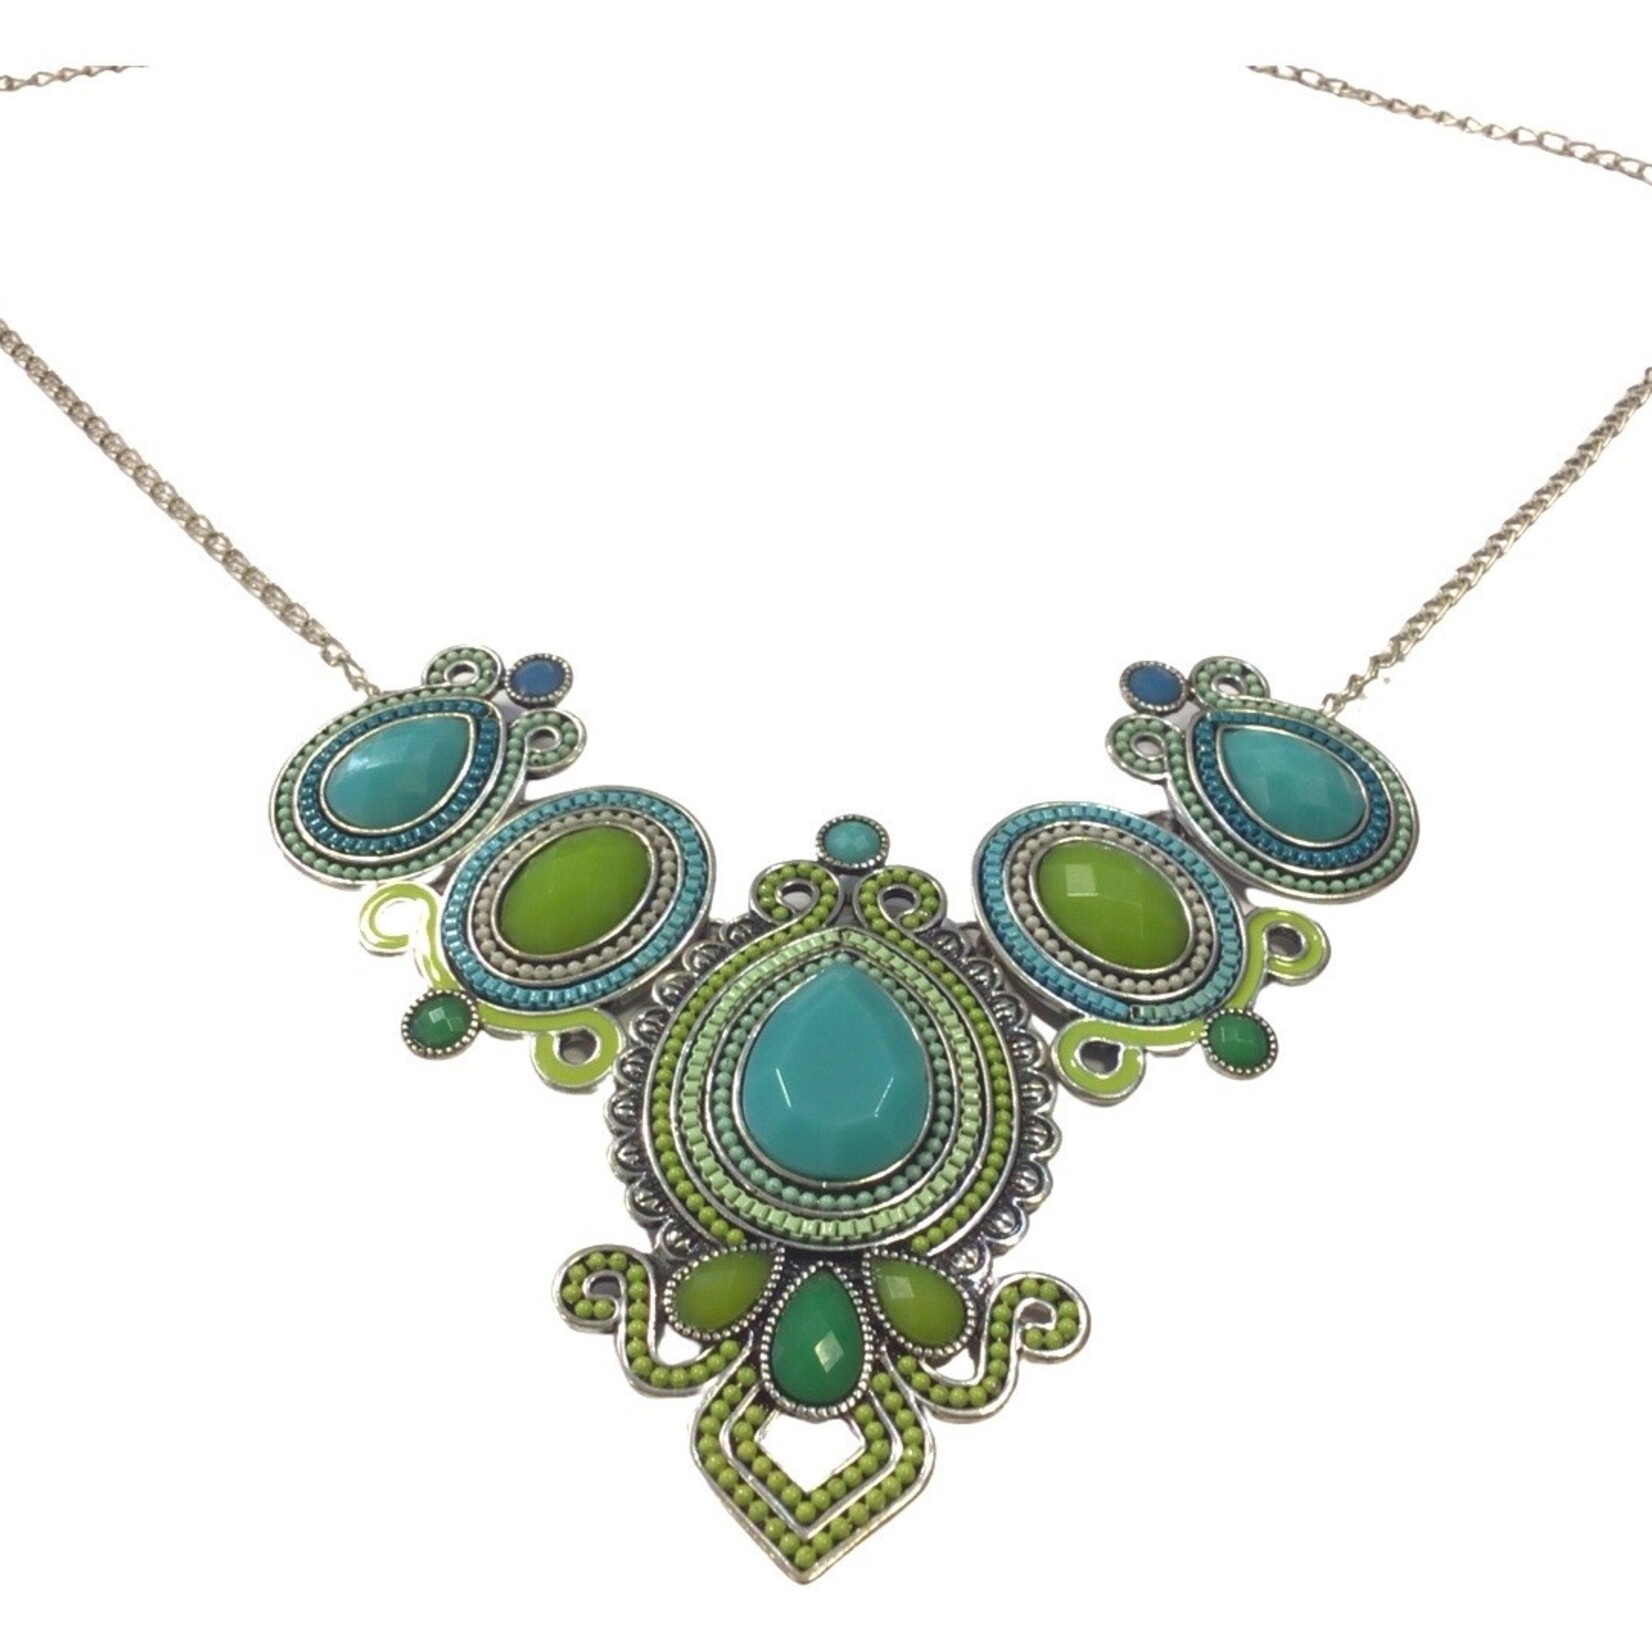 S.S Jewellery Aqua and Green Pendant Silver Necklace